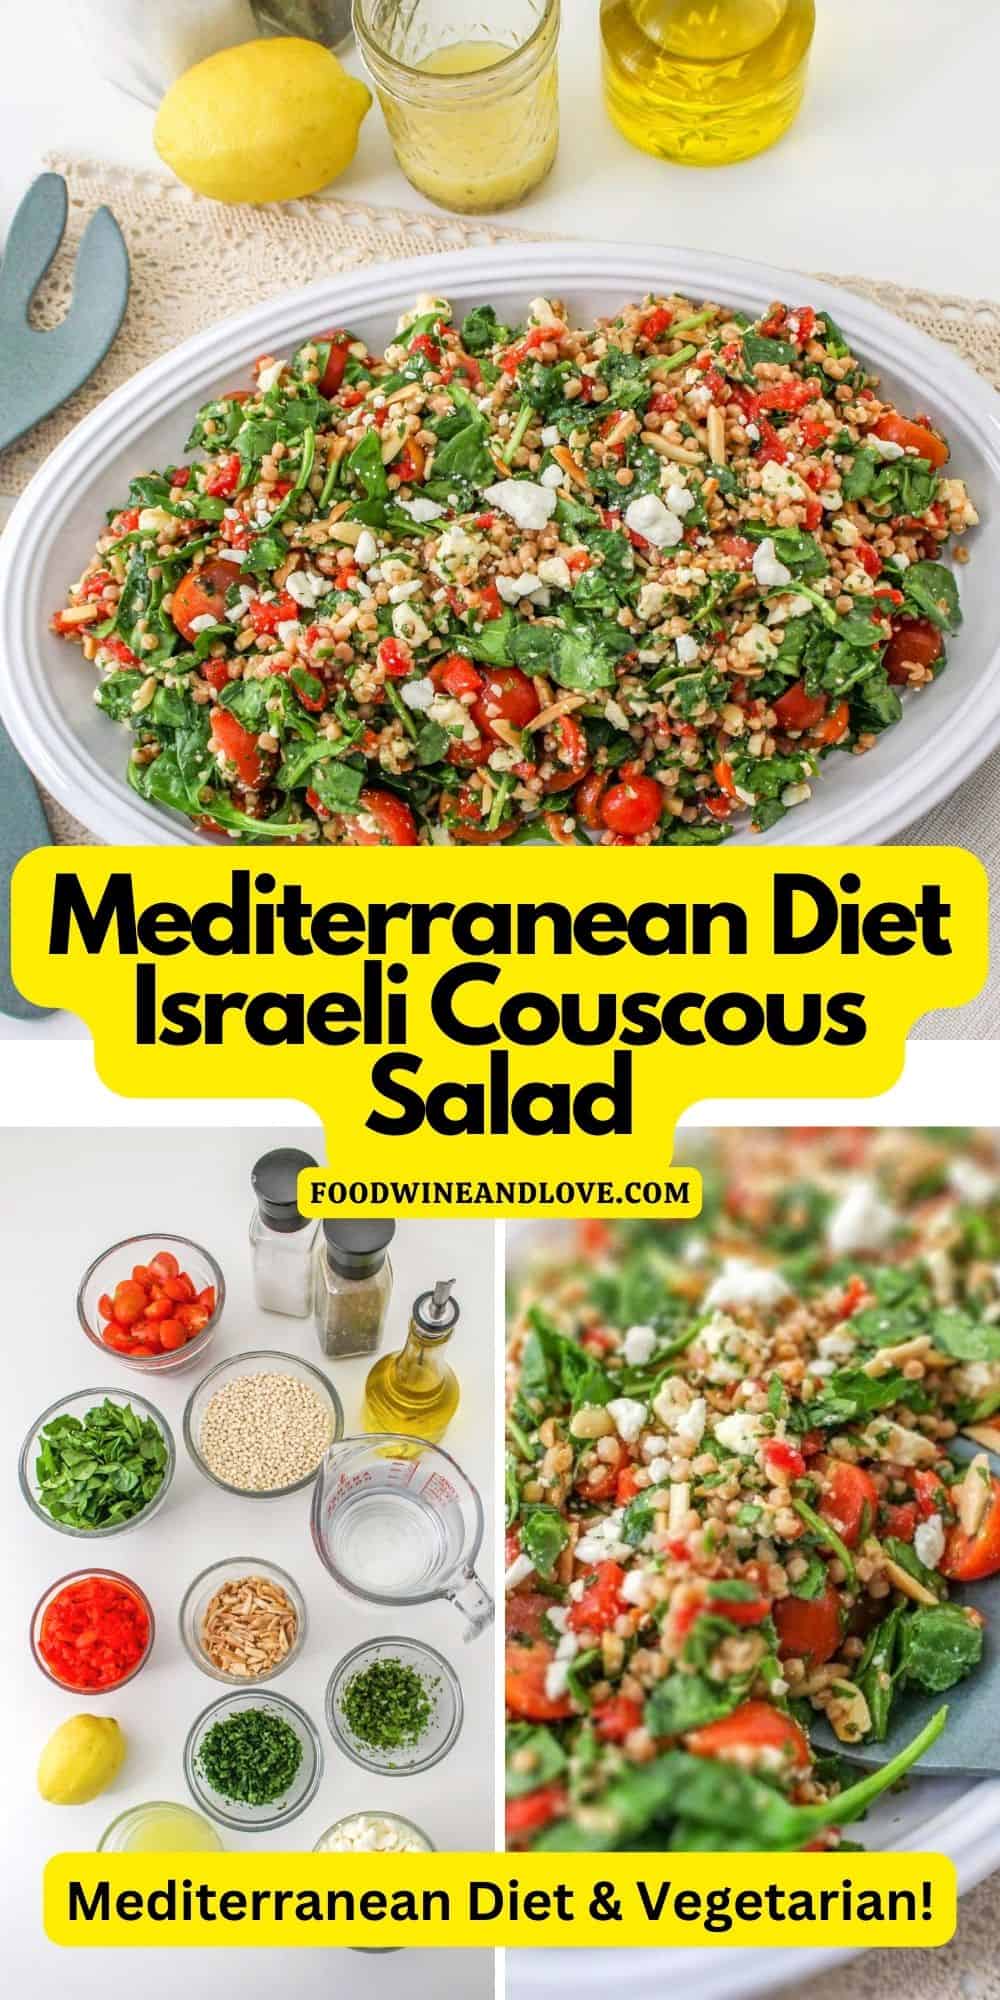 Mediterranean Diet Israeli Couscous Salad, a delicious and flavorful lunch or dinner recipe made with healthy ingredients.